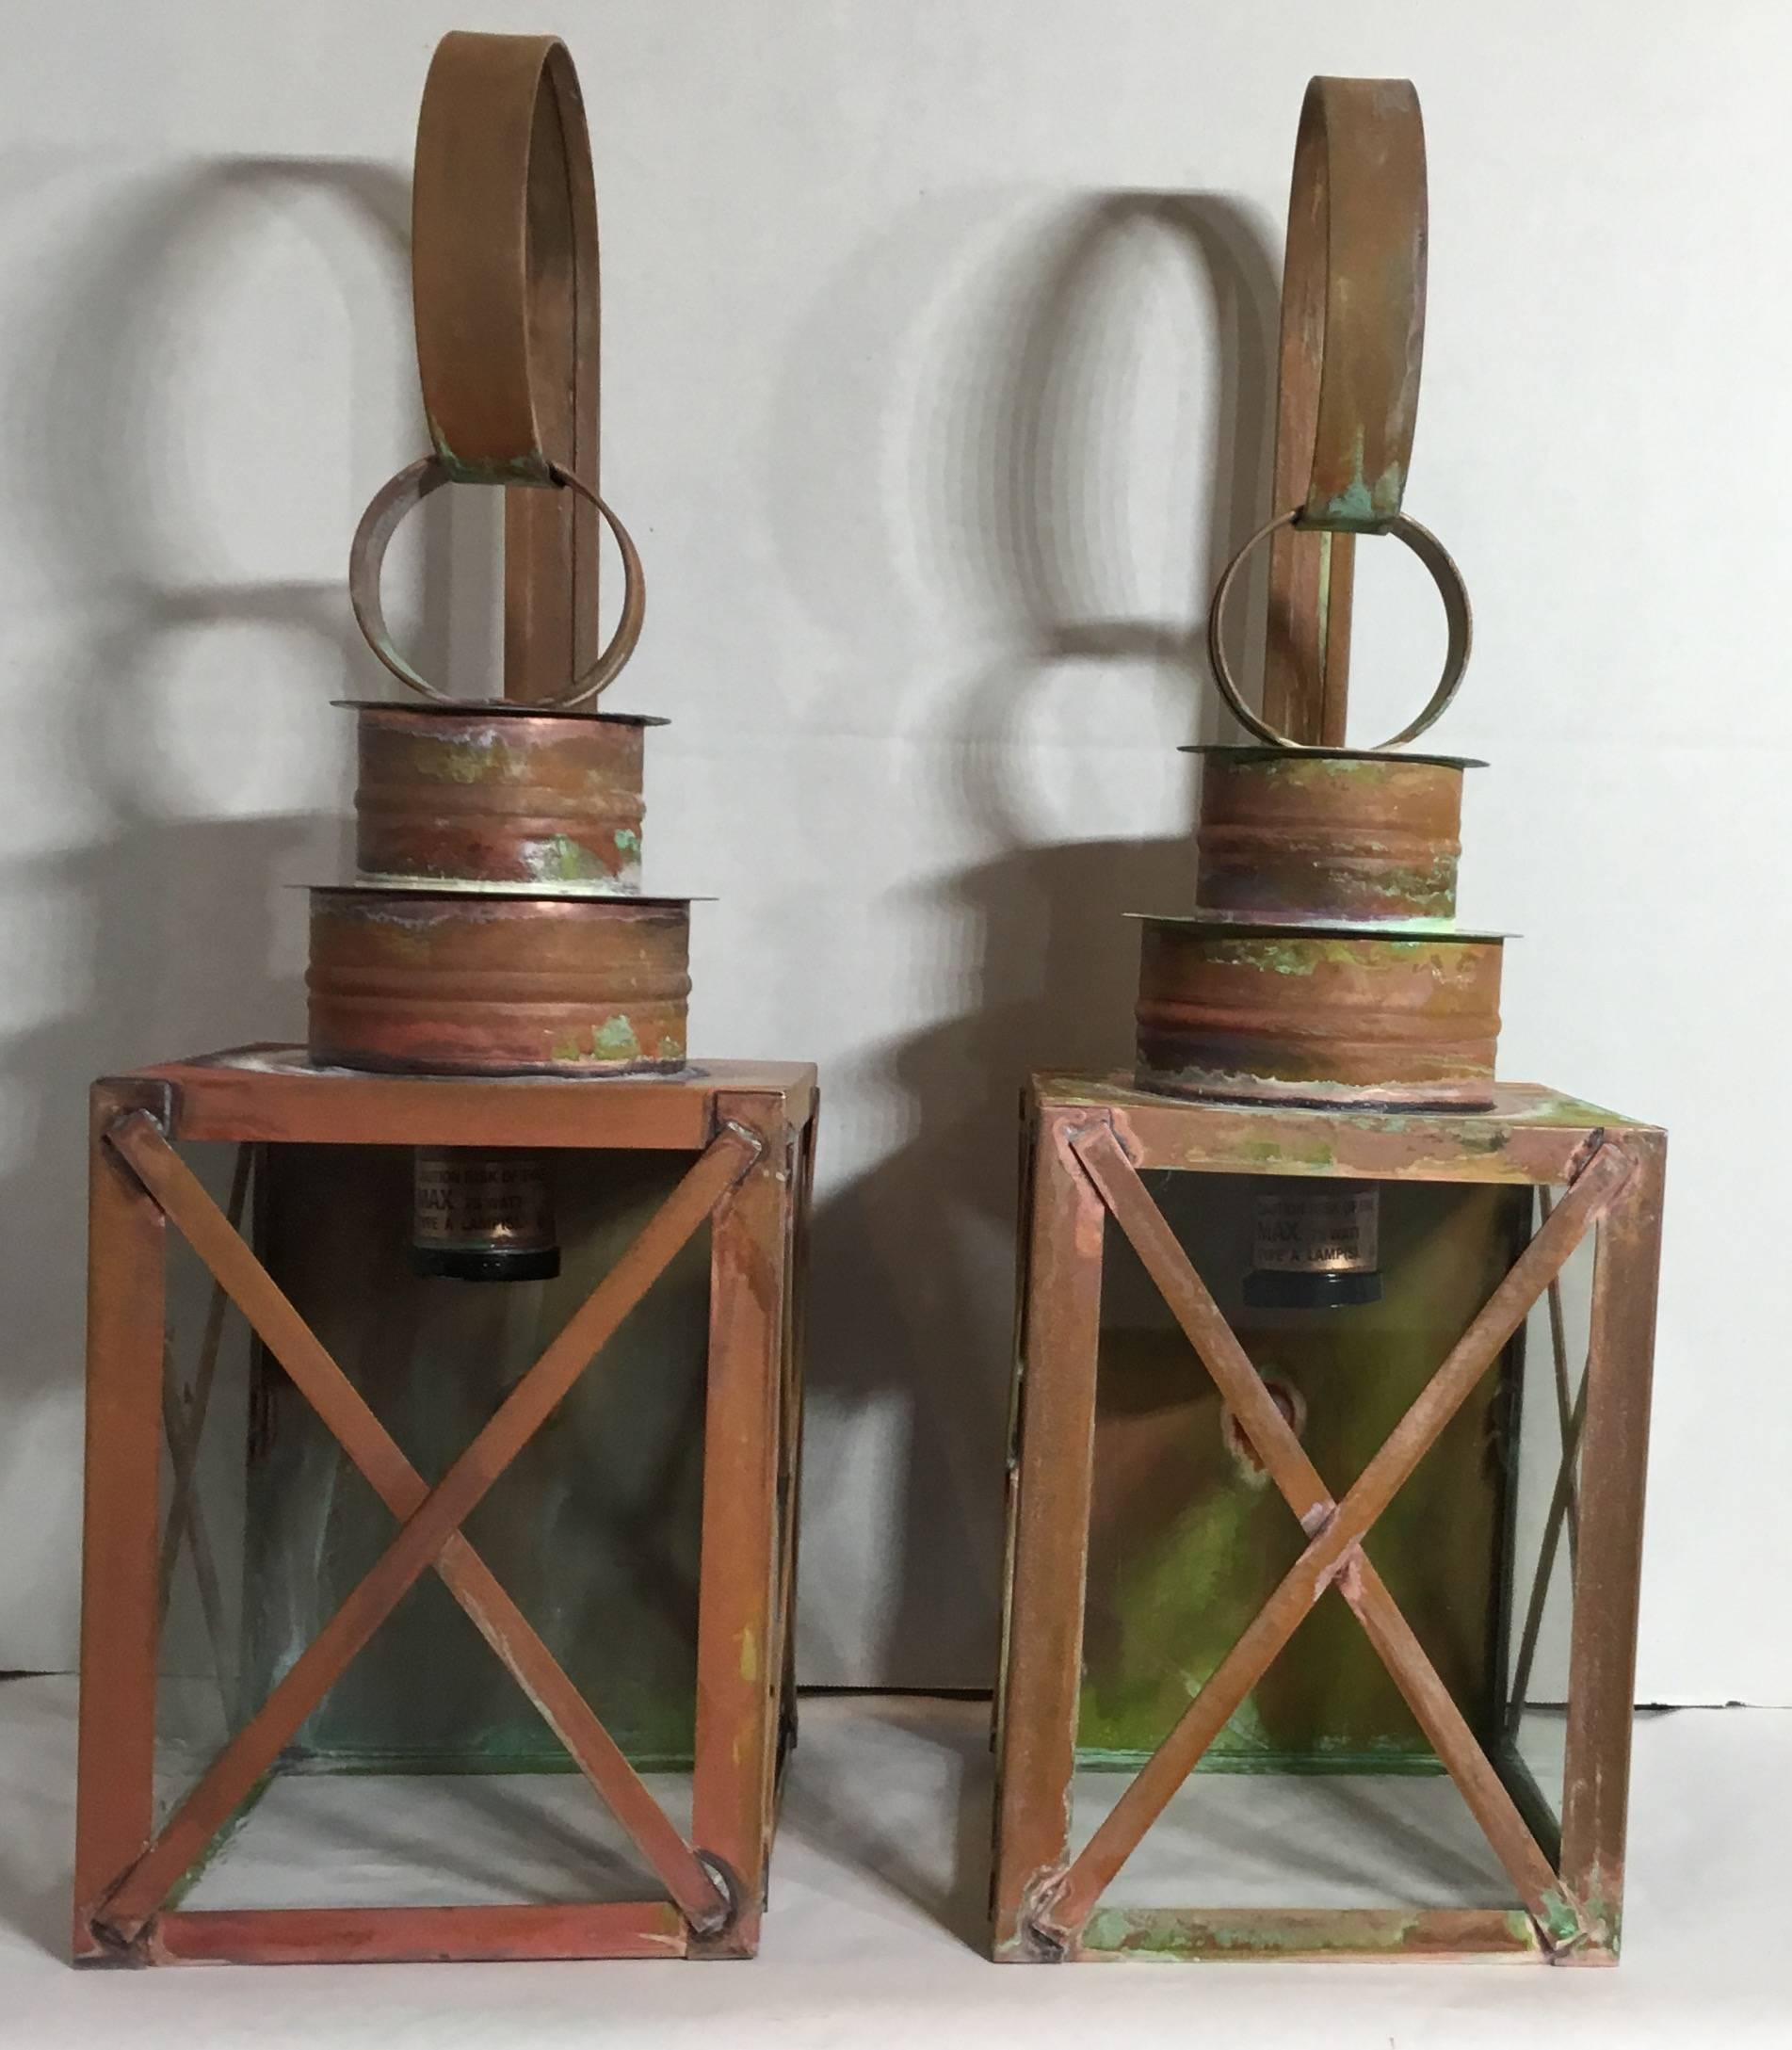 Pair Of Wall lantern made of copper ,with one 75/watt light each .suitable for wet locations.UL approved ,up to US code .
Fine quality ,made in the USA.